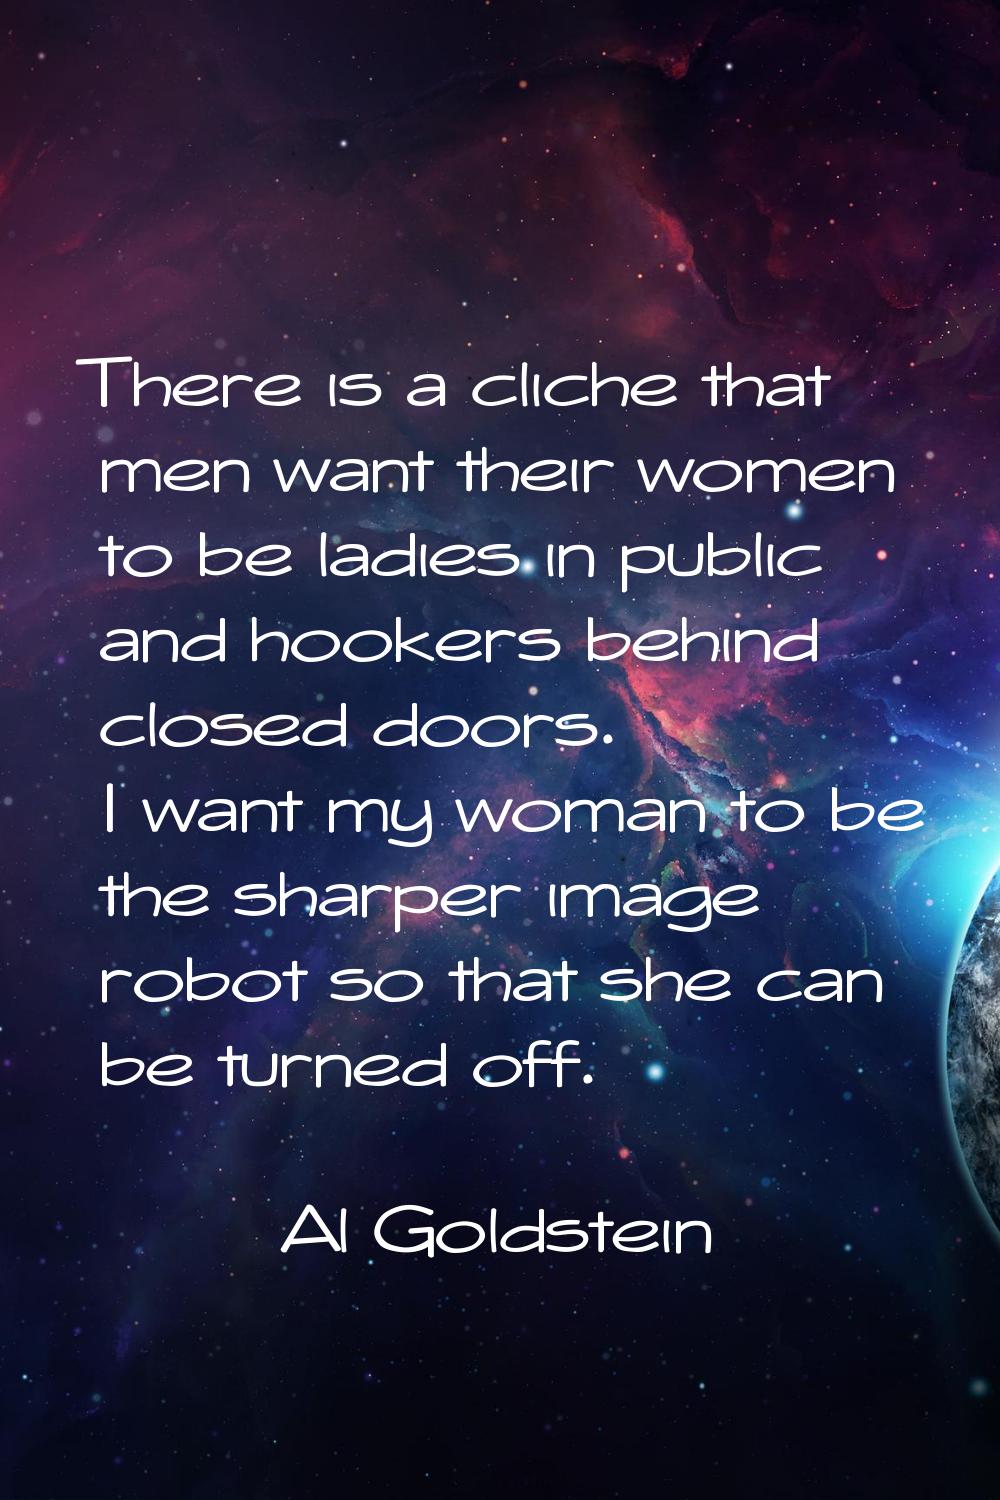 There is a cliche that men want their women to be ladies in public and hookers behind closed doors.